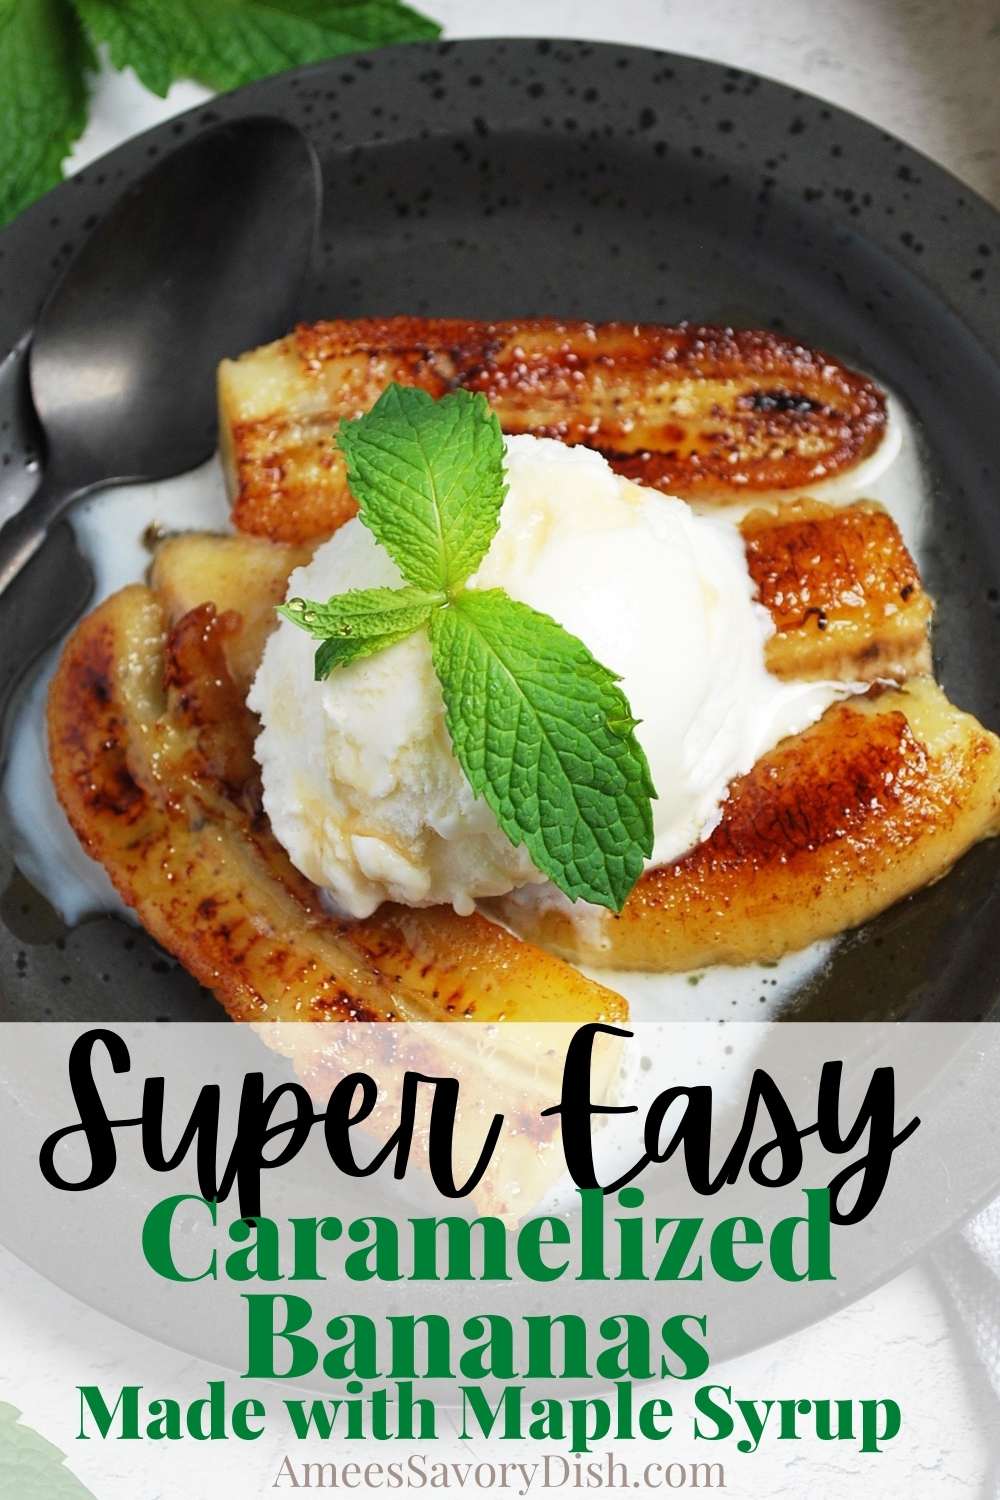 Try this easy caramelized bananas recipe made with salted butter and real maple syrup. A heavenly dessert made without refined sugar ready in under 10 minutes. via @Ameessavorydish